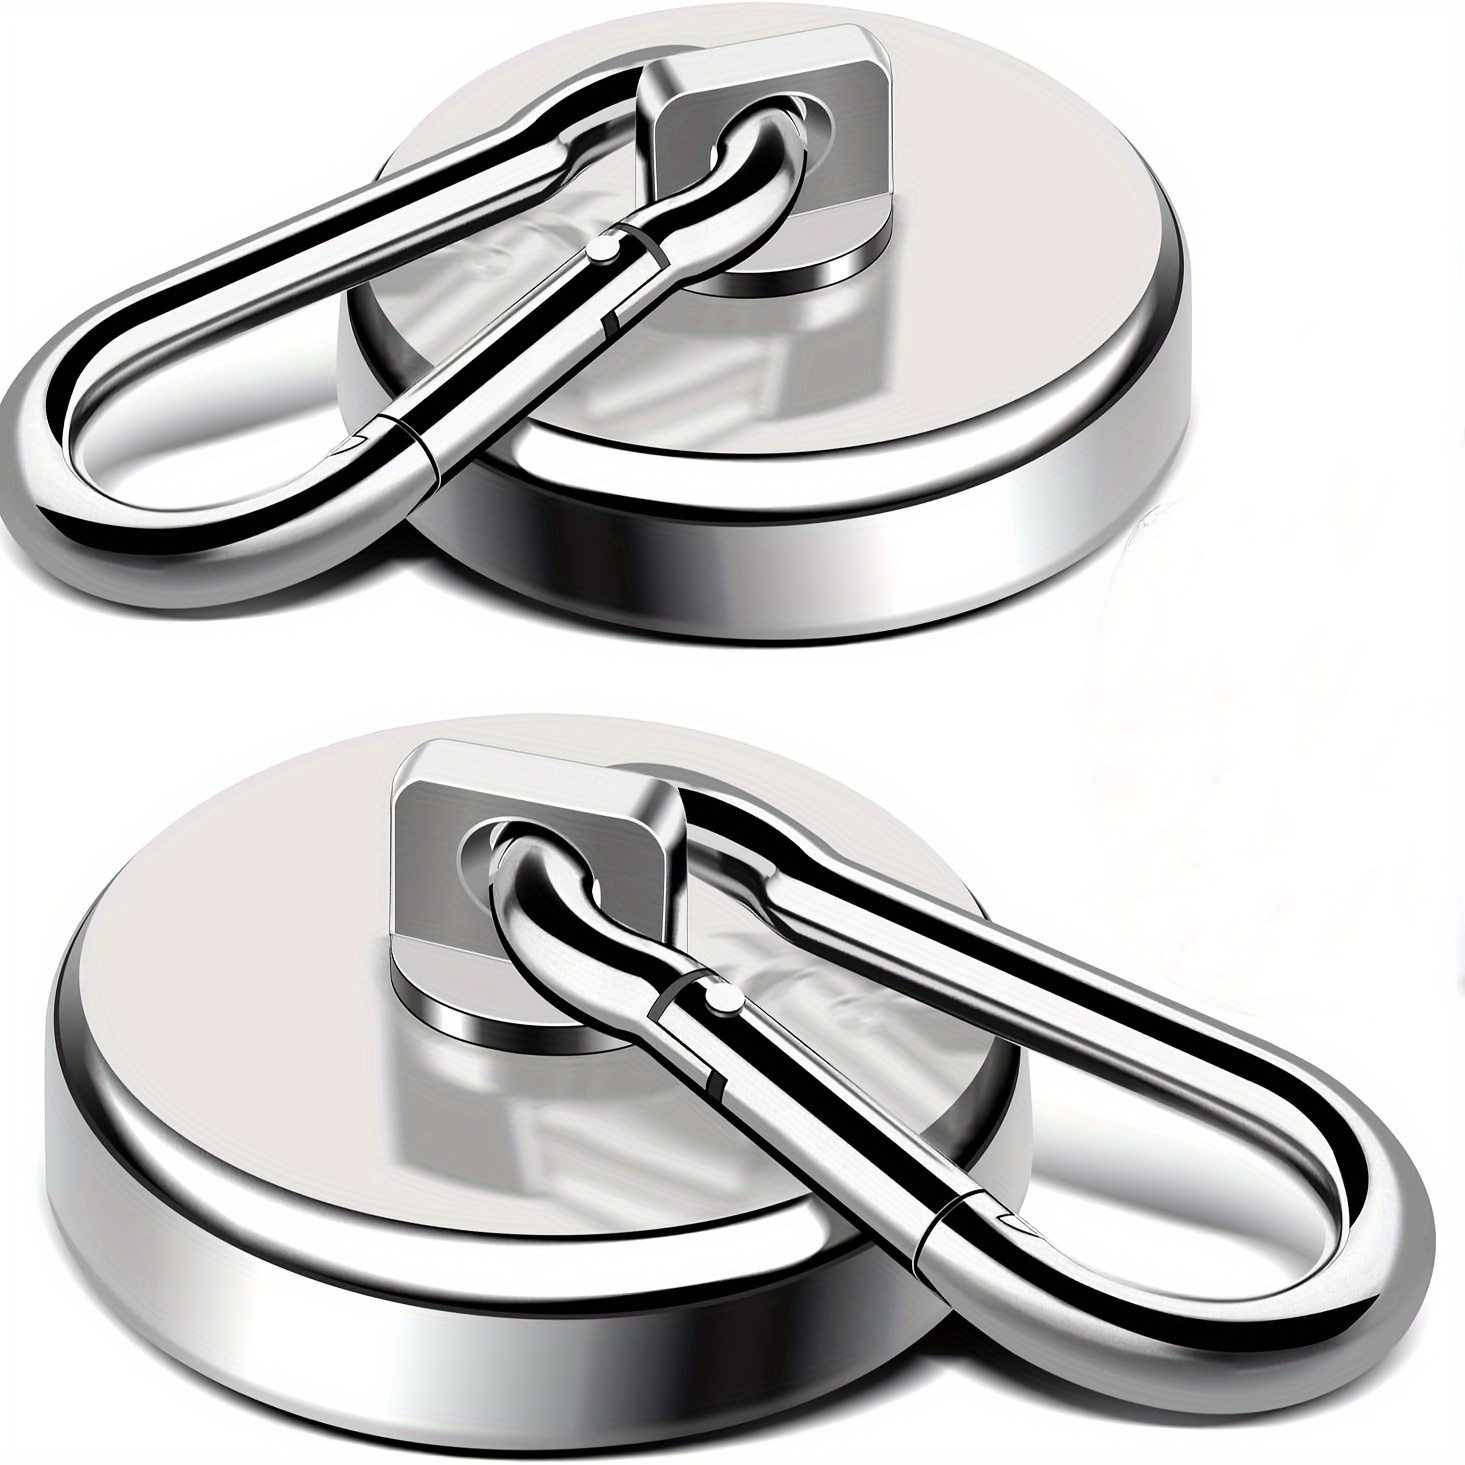 

2pcs Magnetic Hooks Heavy Duty, 100lbs Strong Magnetic Hooks Neodymium Magnets With Carabiner, Magnet Hooks With Swivel For Bbq, Hanging, Cruise, Kitchen, Garage, Refrigerator